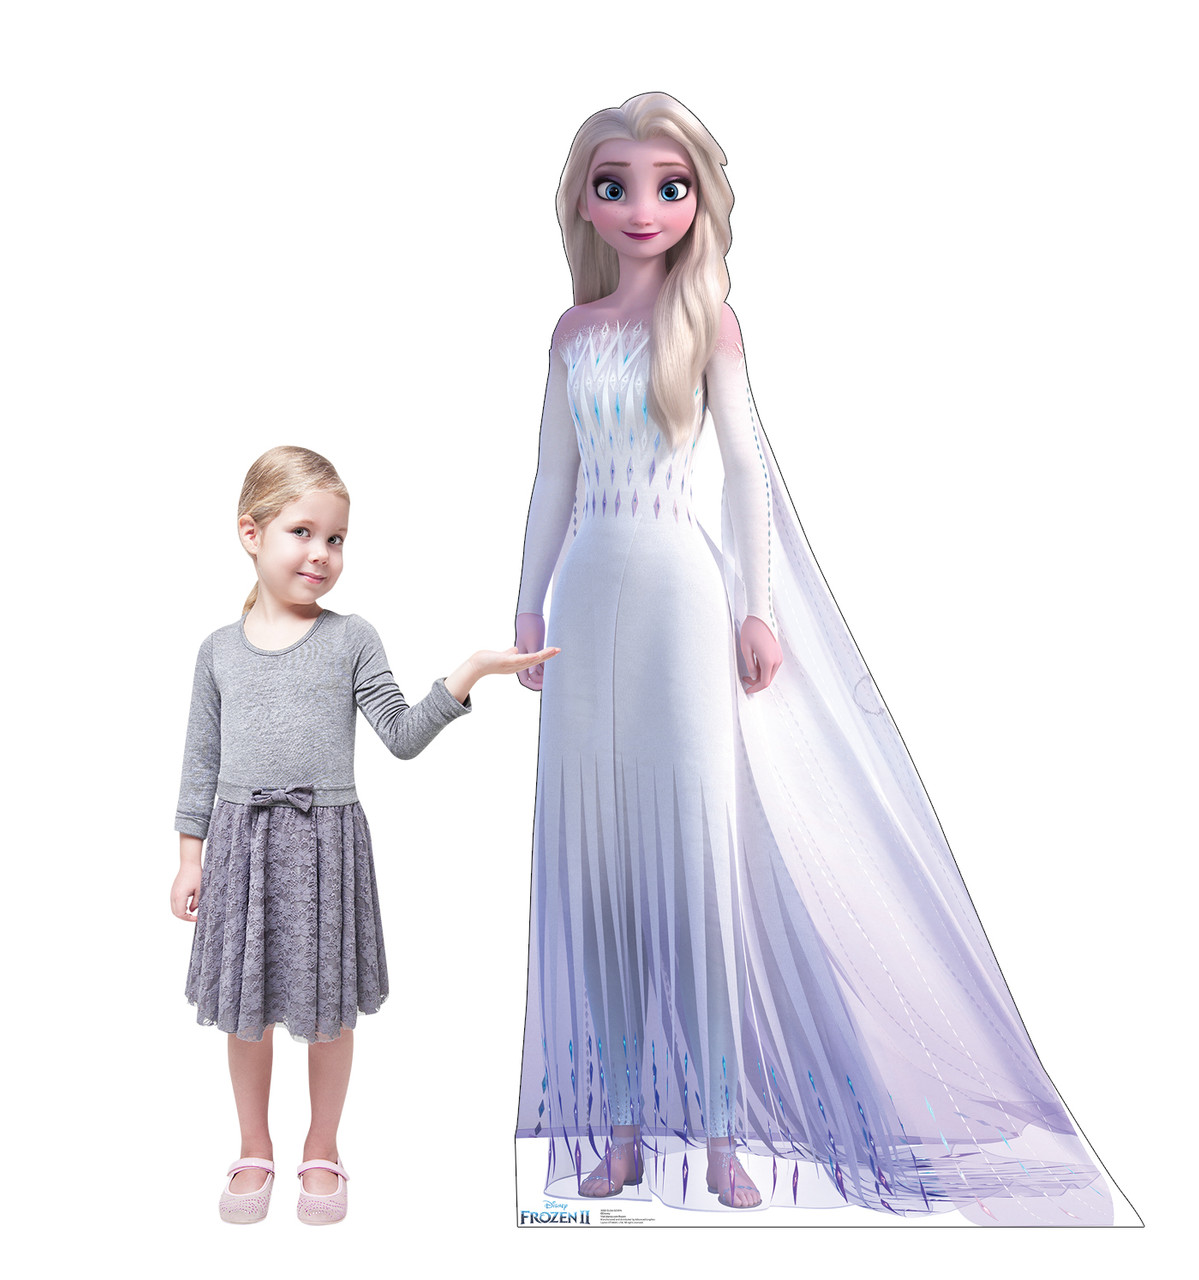 Life-size cardboard standee of Elsa Epilogue Gown from Disney's Frozen 2 with model.